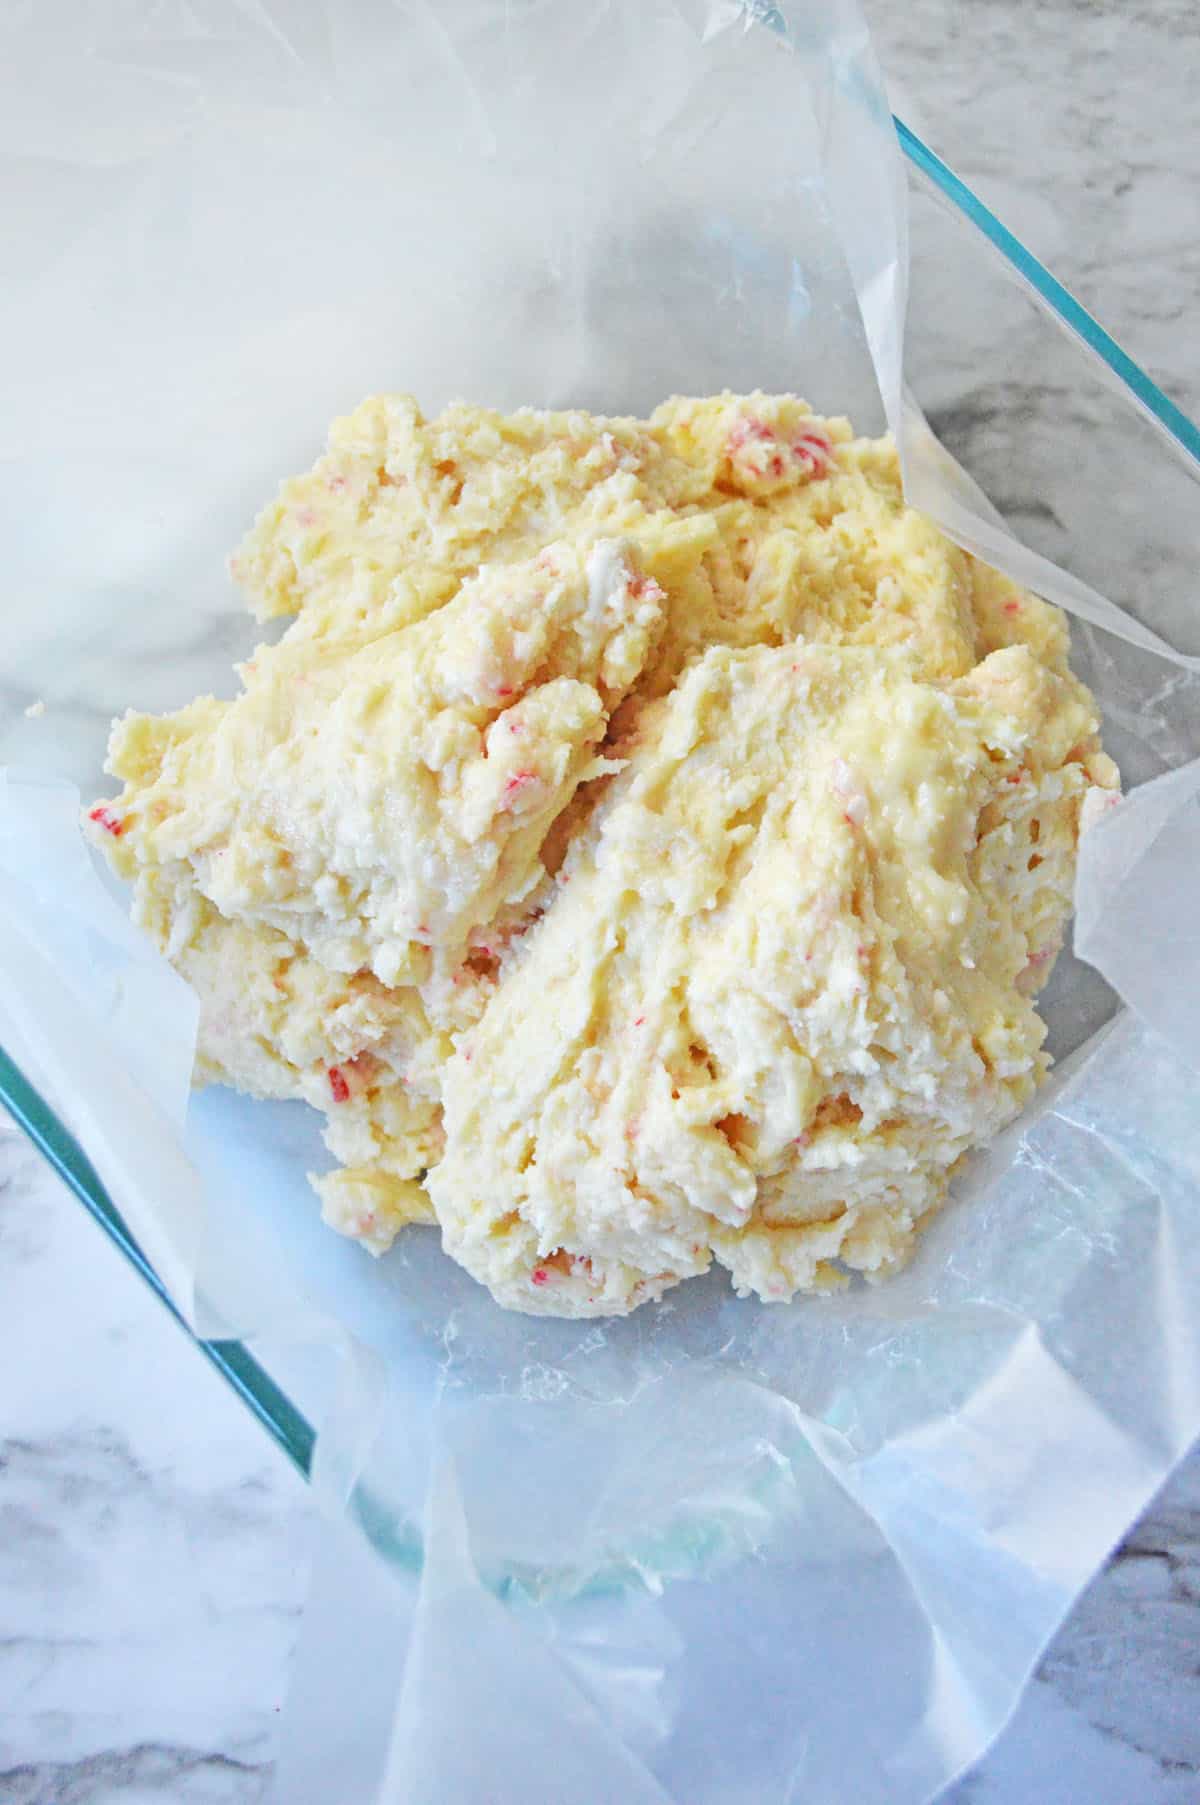 White chocolate chips, condensed milk, and peppermint candies combined in a glass baking pan.